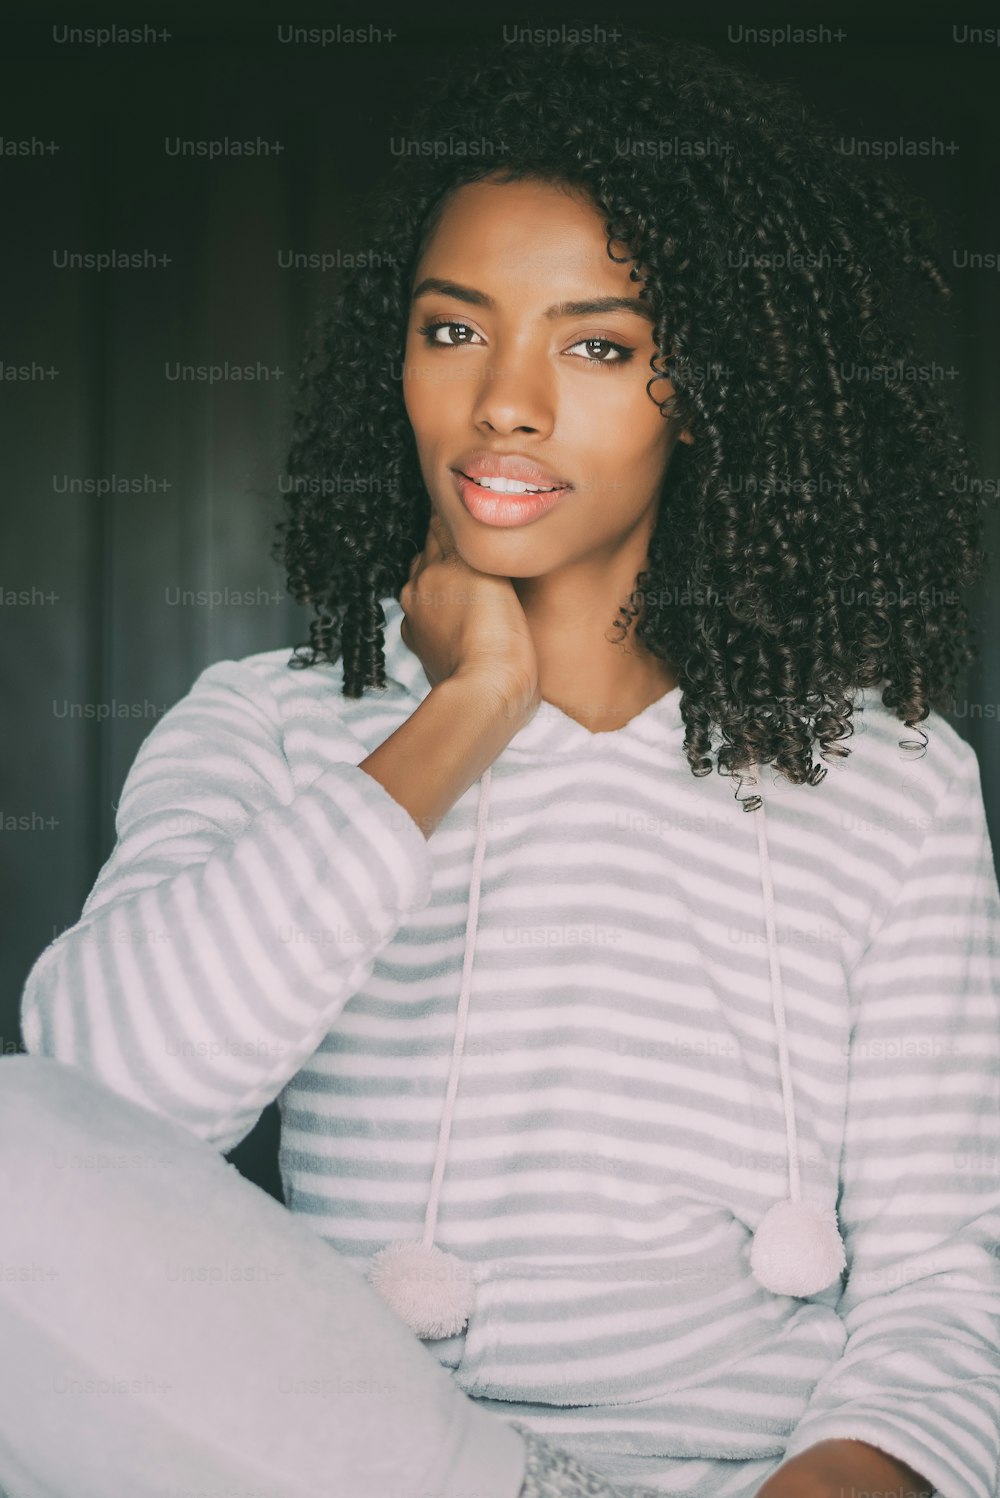 portrait of a pretty black woman with curly hair smiling sit on bed looking at the camera